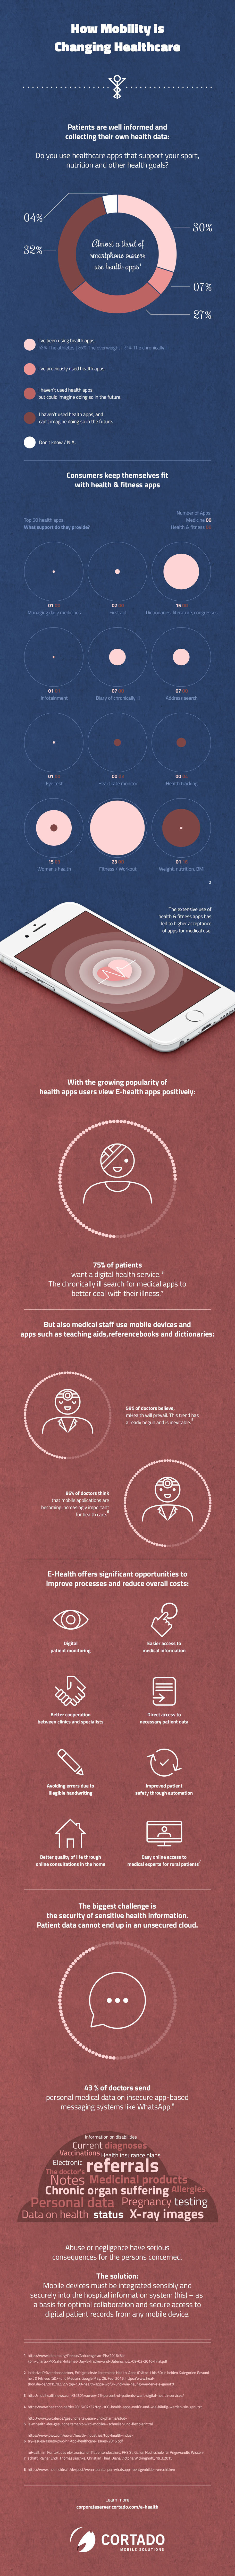 Infographic: How Mobility is Changing Health Care